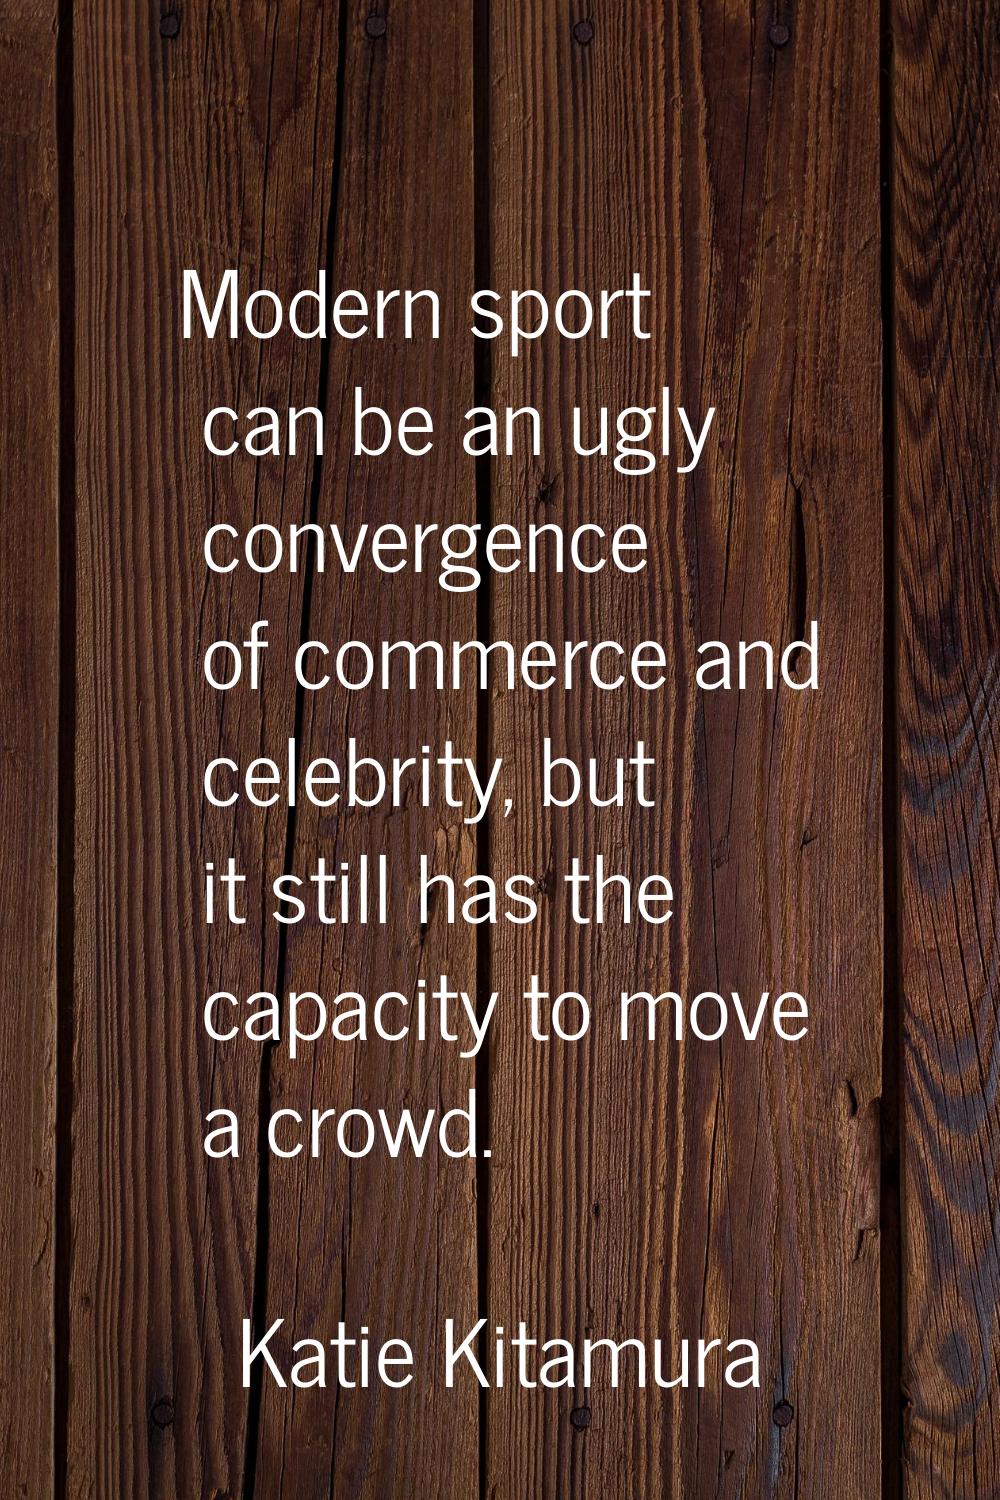 Modern sport can be an ugly convergence of commerce and celebrity, but it still has the capacity to